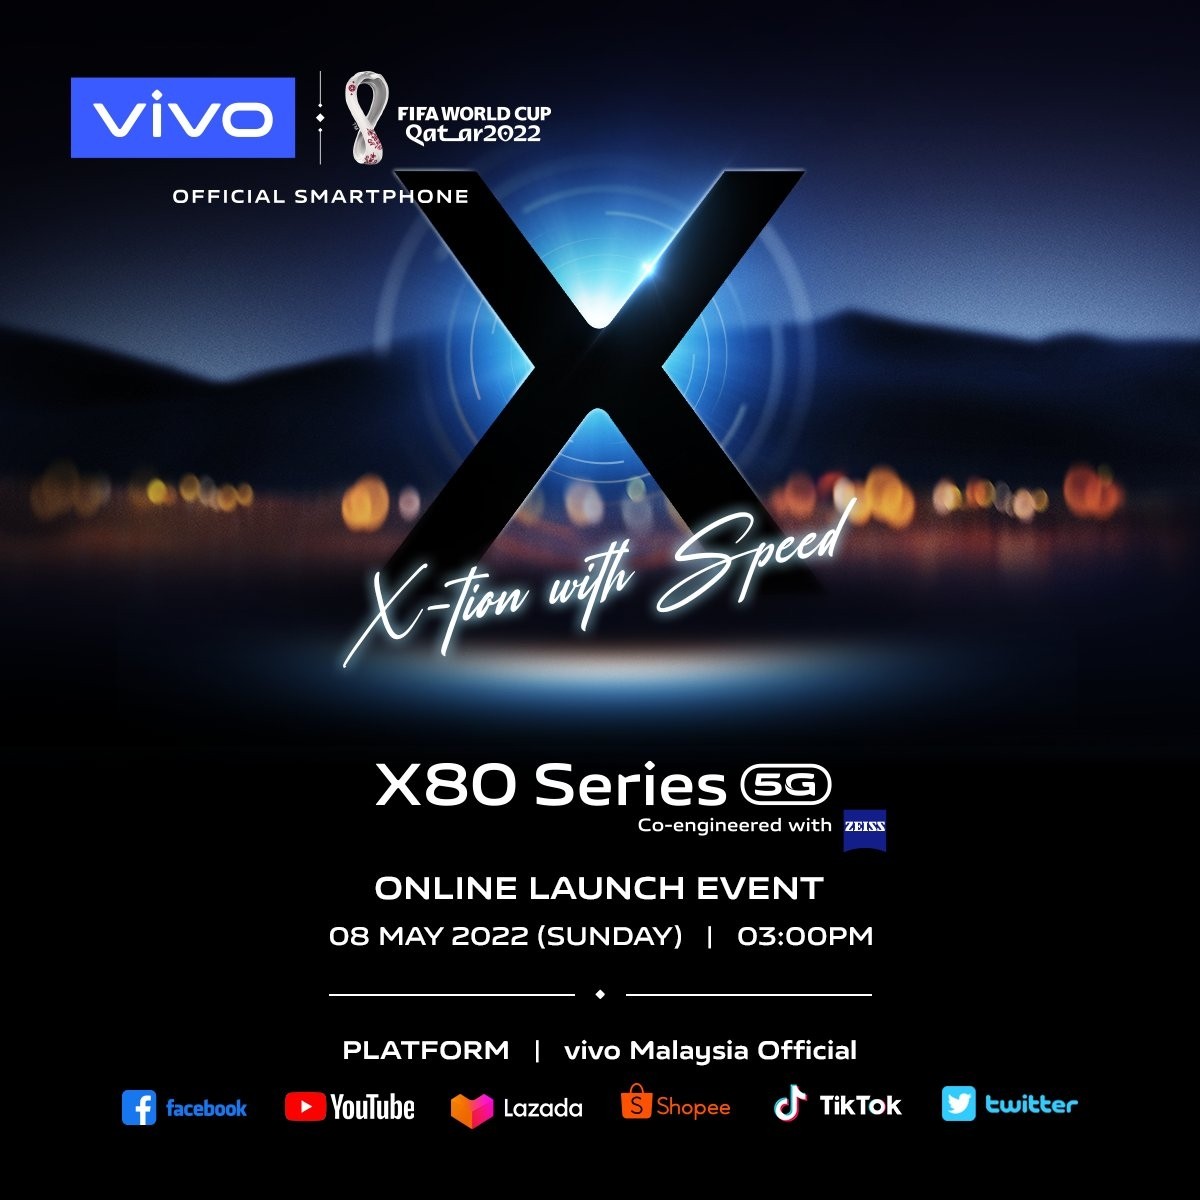 vivo X80 series launches globally on May 8